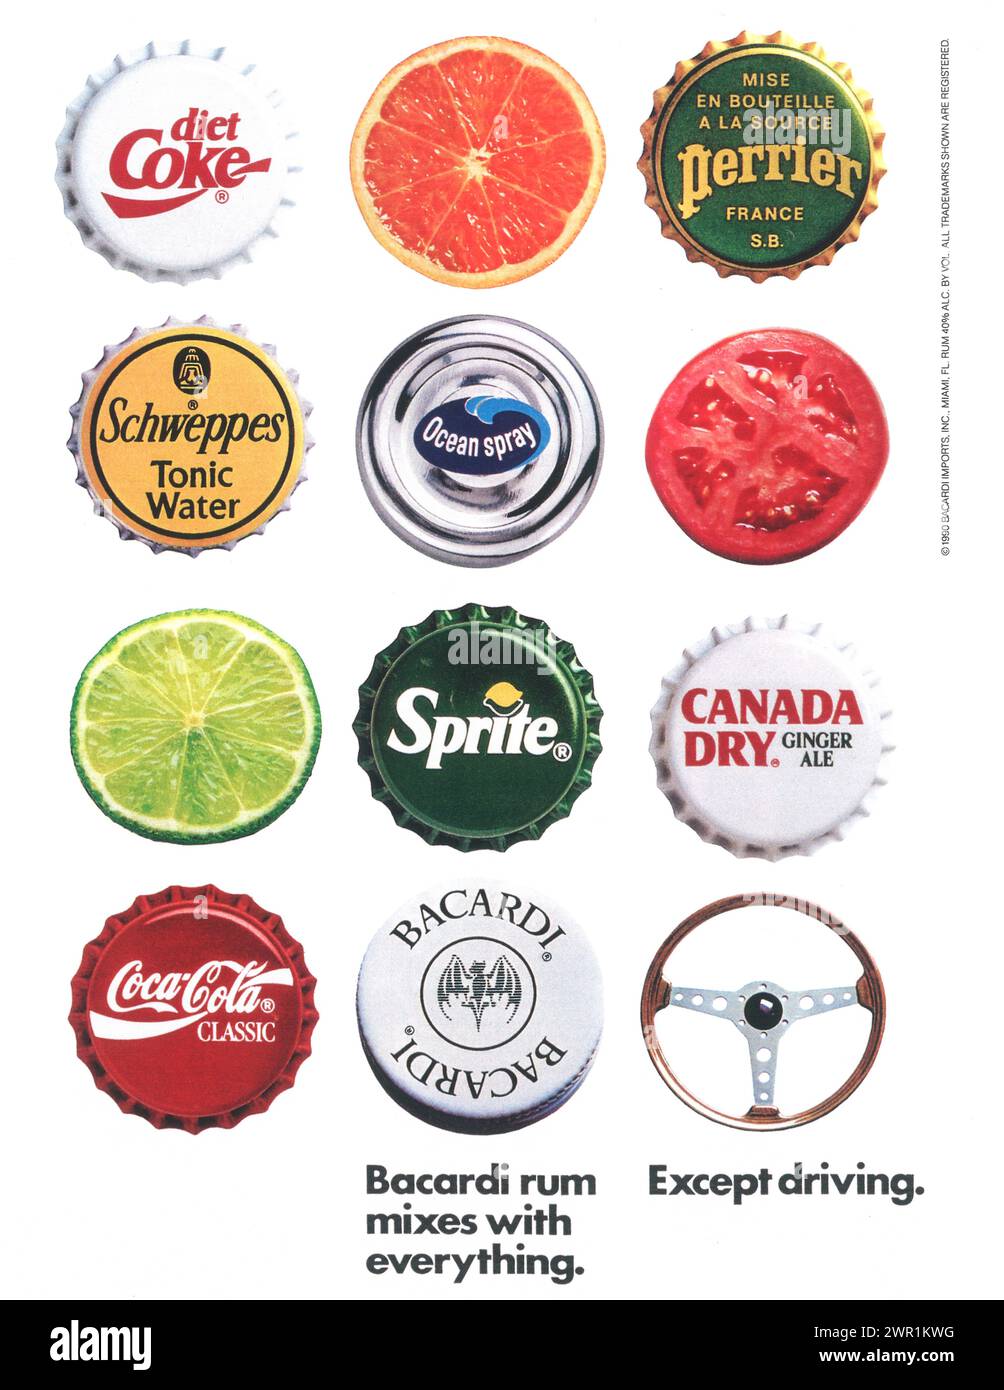 1990 Bacardi Rum Print Ad. 'Bacardi Rum mixes with everything. Except driving.' Stock Photo